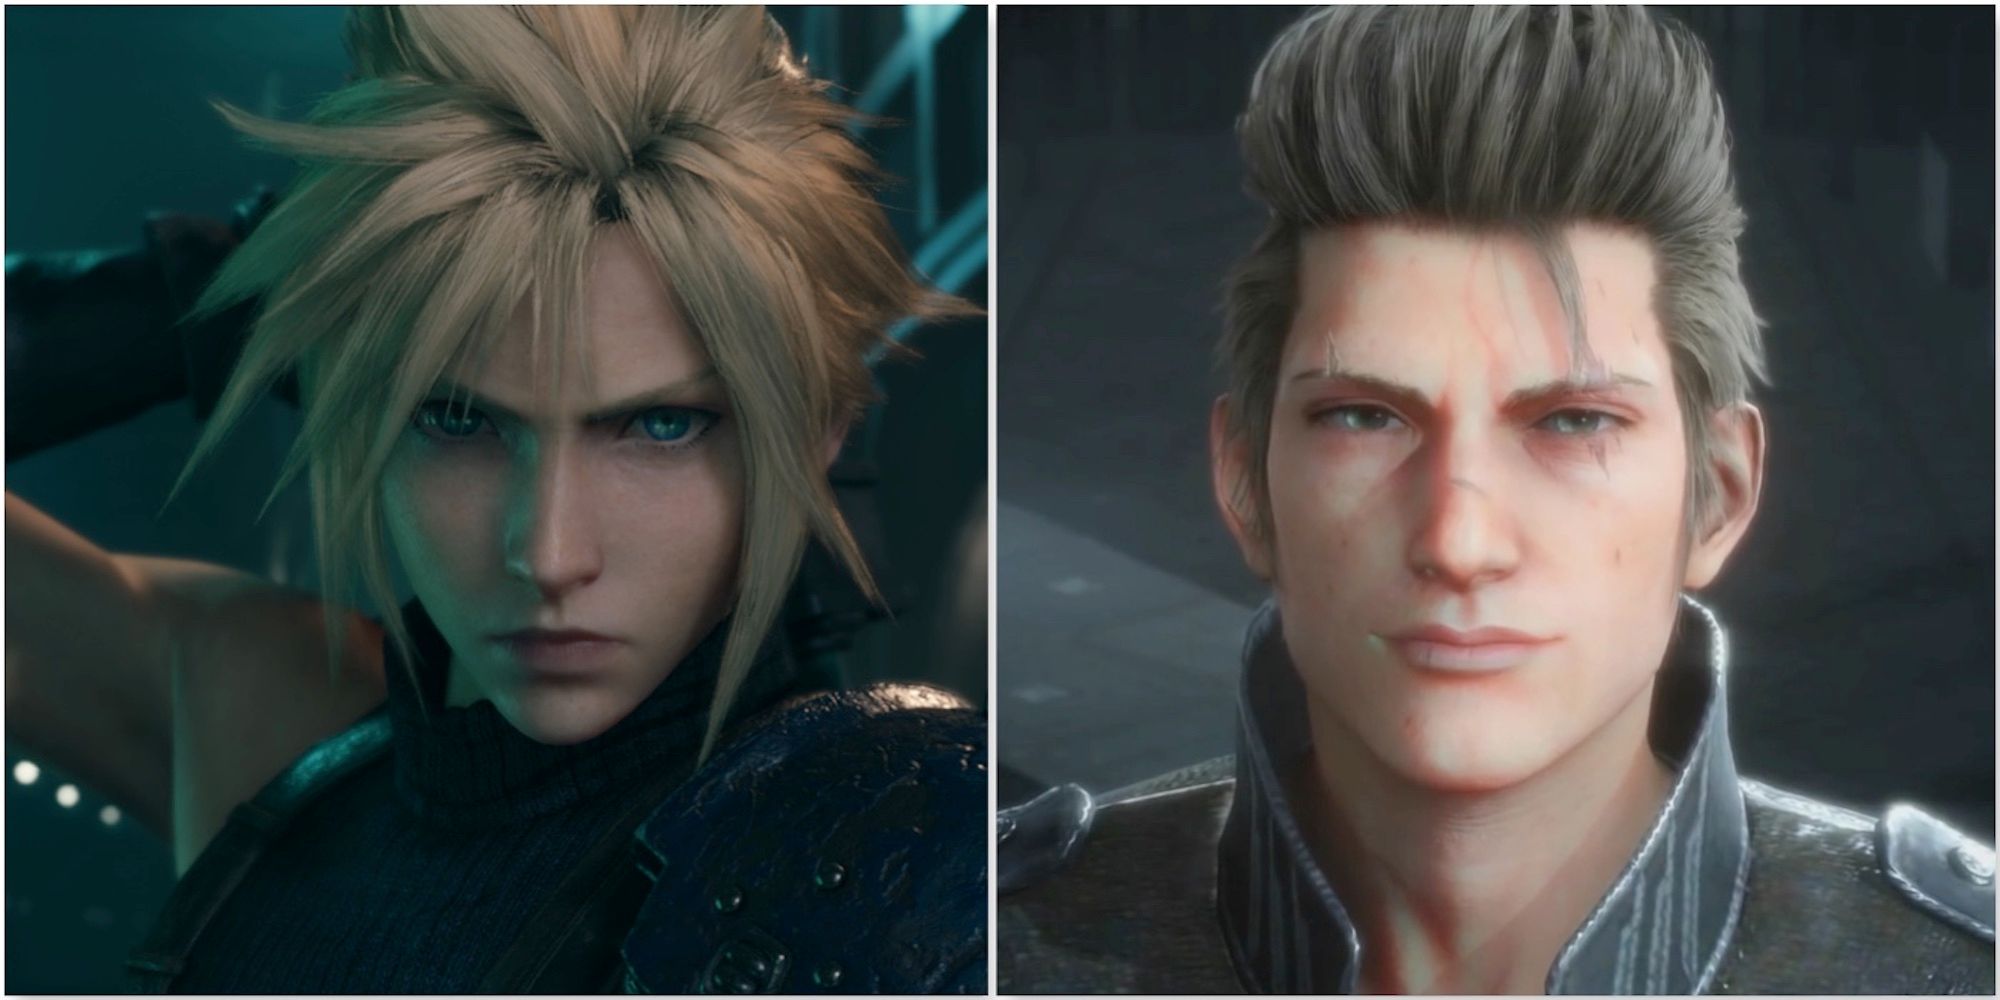 Cloud in Final Fantasy 7 Remake and Ignis in Final Fantasy 15